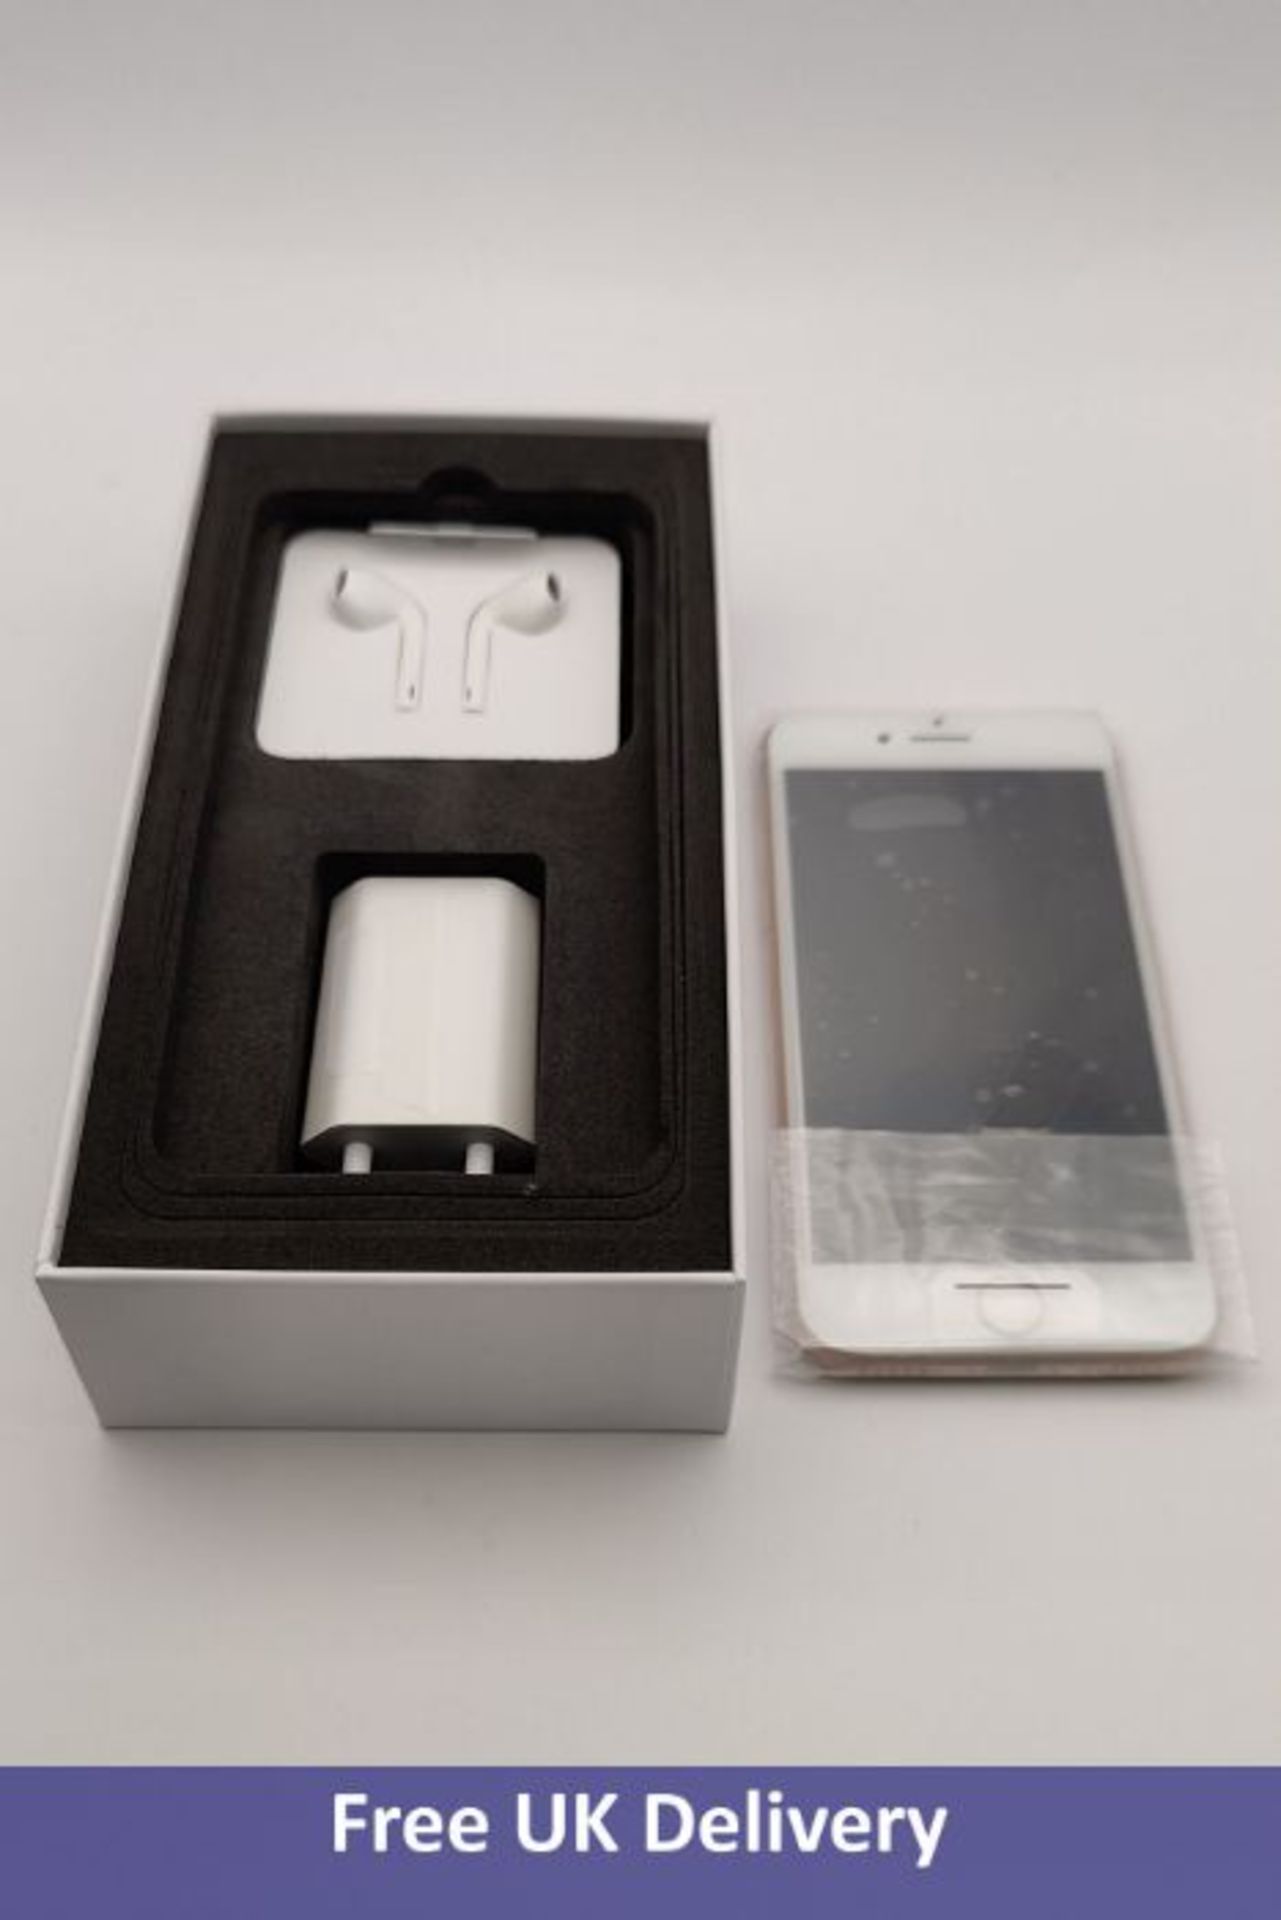 Apple iPhone 8 256GB, Gold, A1905/NQ7T2LL/A, Refurbished, boxed with headphones. Requires UK charger